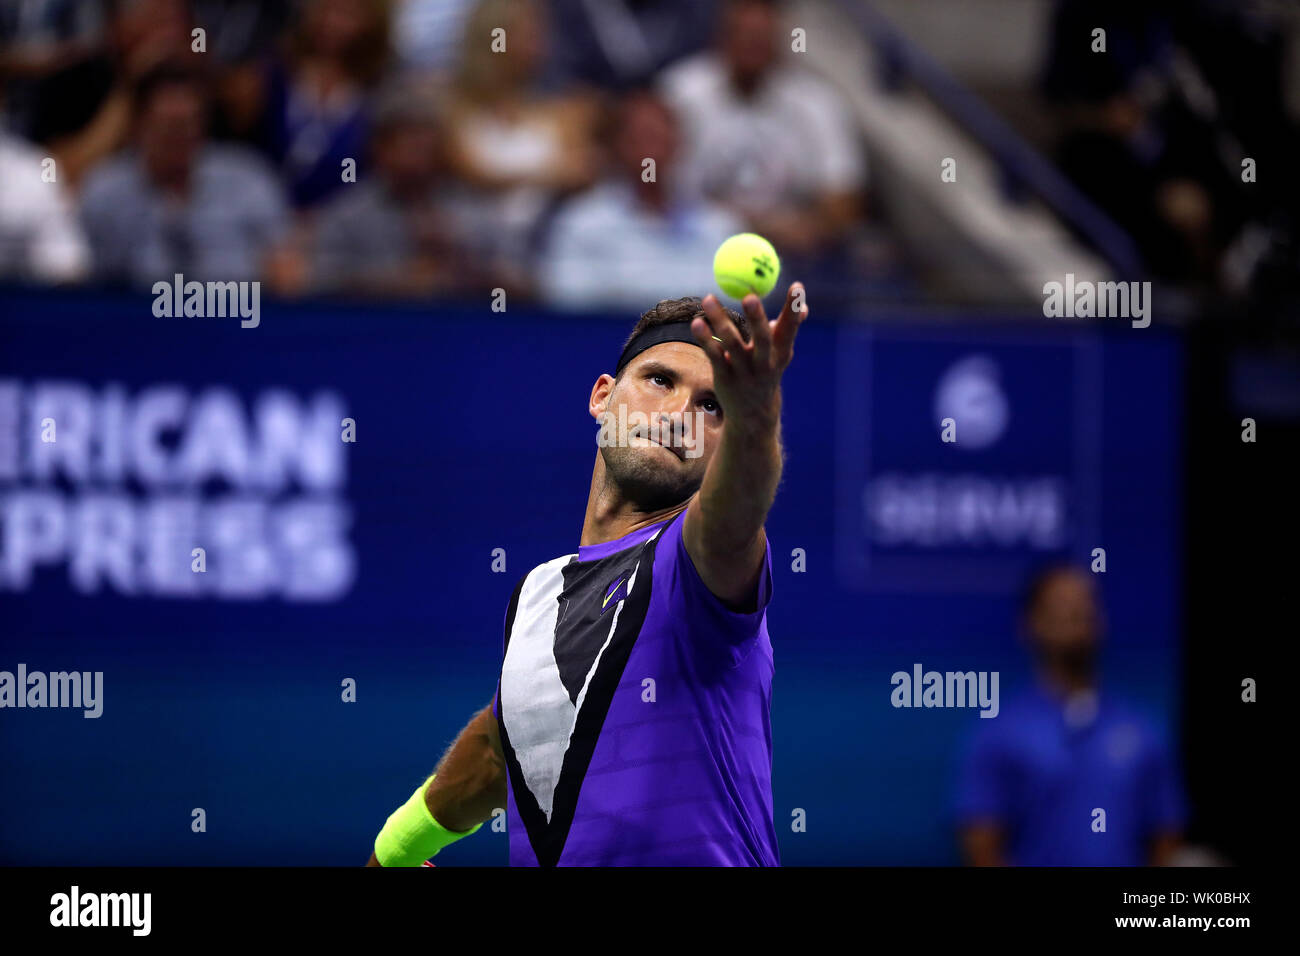 Flushing Meadows, New York, United States - 3 September 2019. Grigor Dimitrov of Bulgaria serving to Roger Federer during their quarter final match at the US Open in Flushing Meadows, New York.  Dimitrov upset Federer in five sets to advance to the semi finals Credit: Adam Stoltman/Alamy Live News Stock Photo